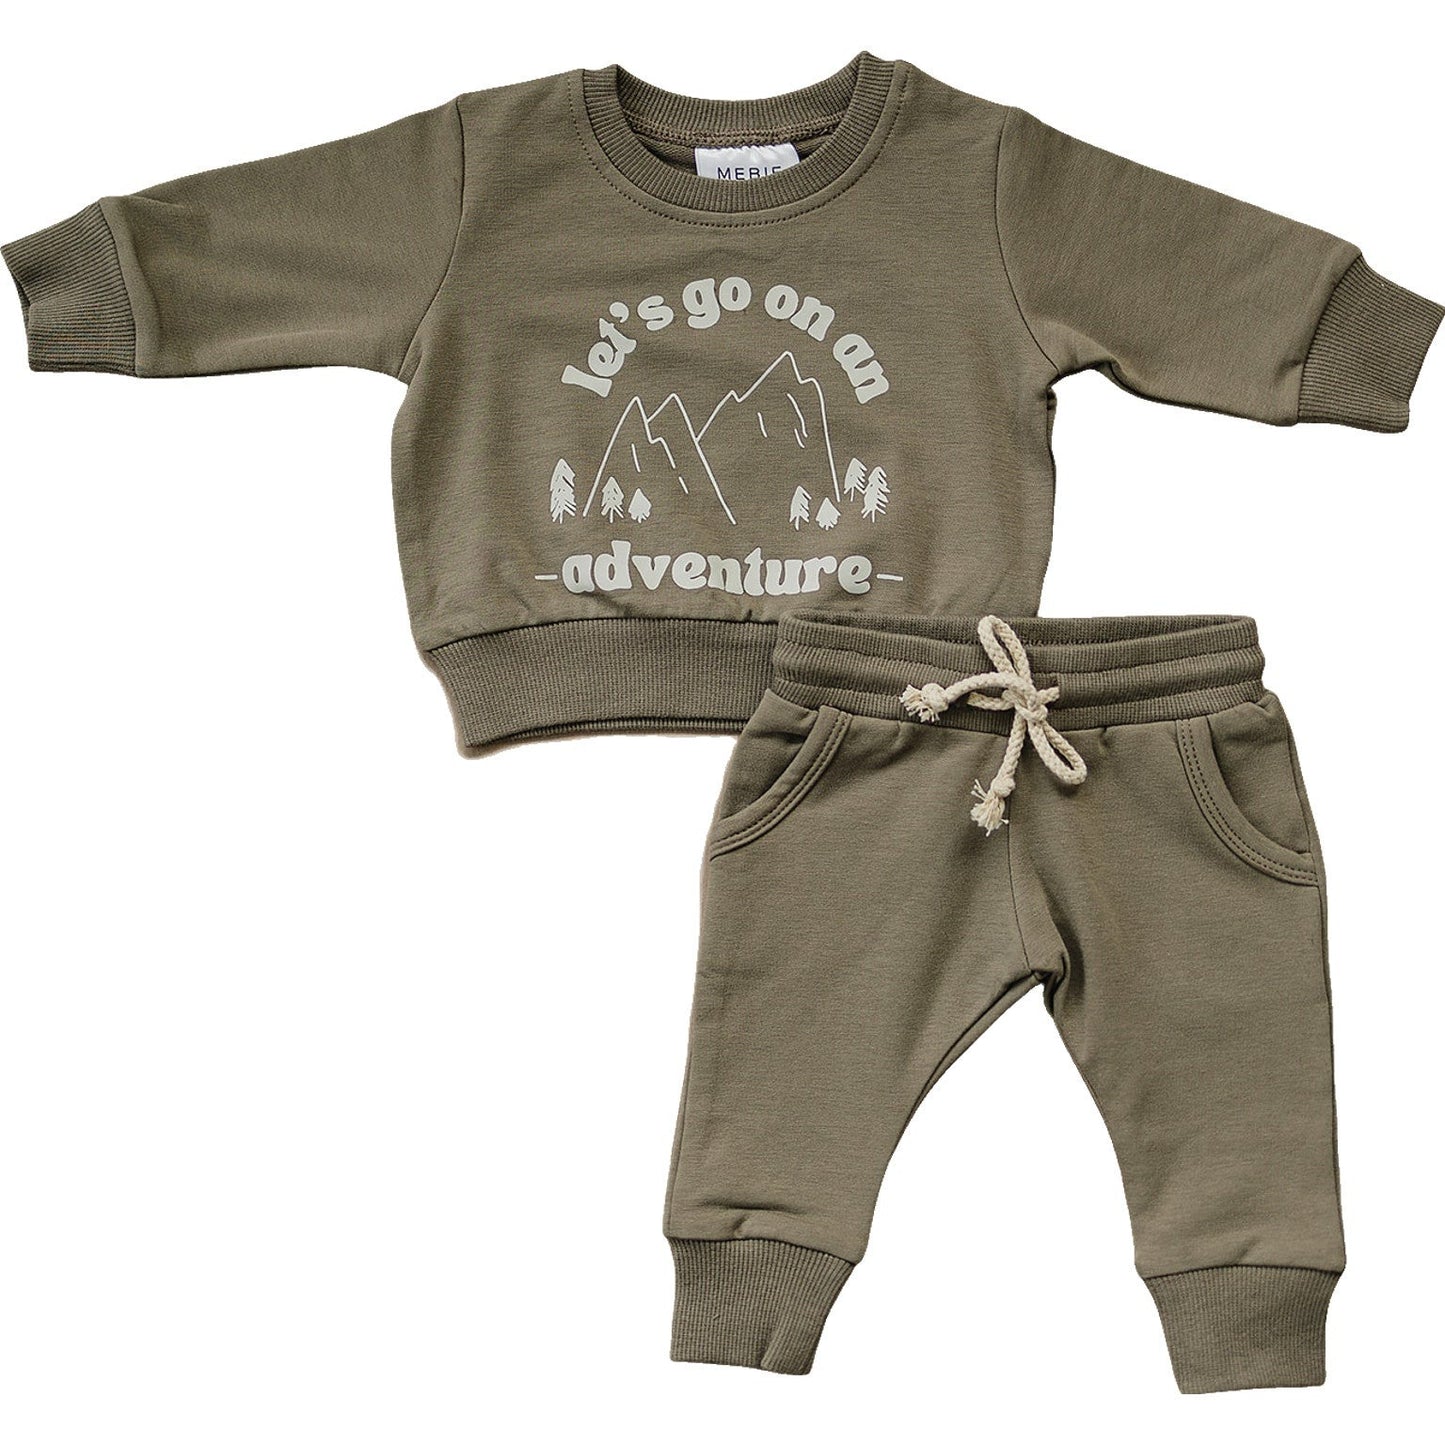 Mebie Baby French Terry Set - Adventure